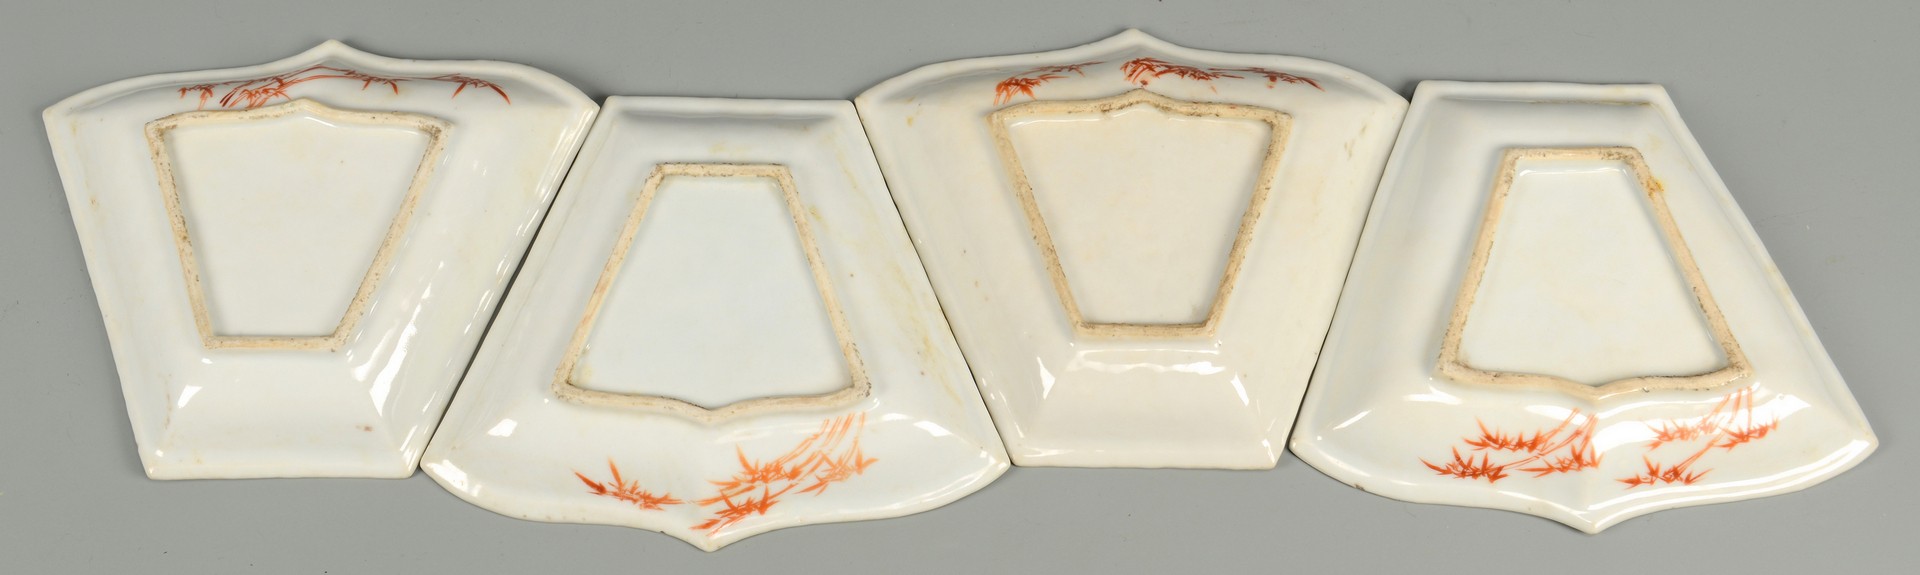 Lot 715: Chinese Famille Rose 9-Piece Sectioned Tray